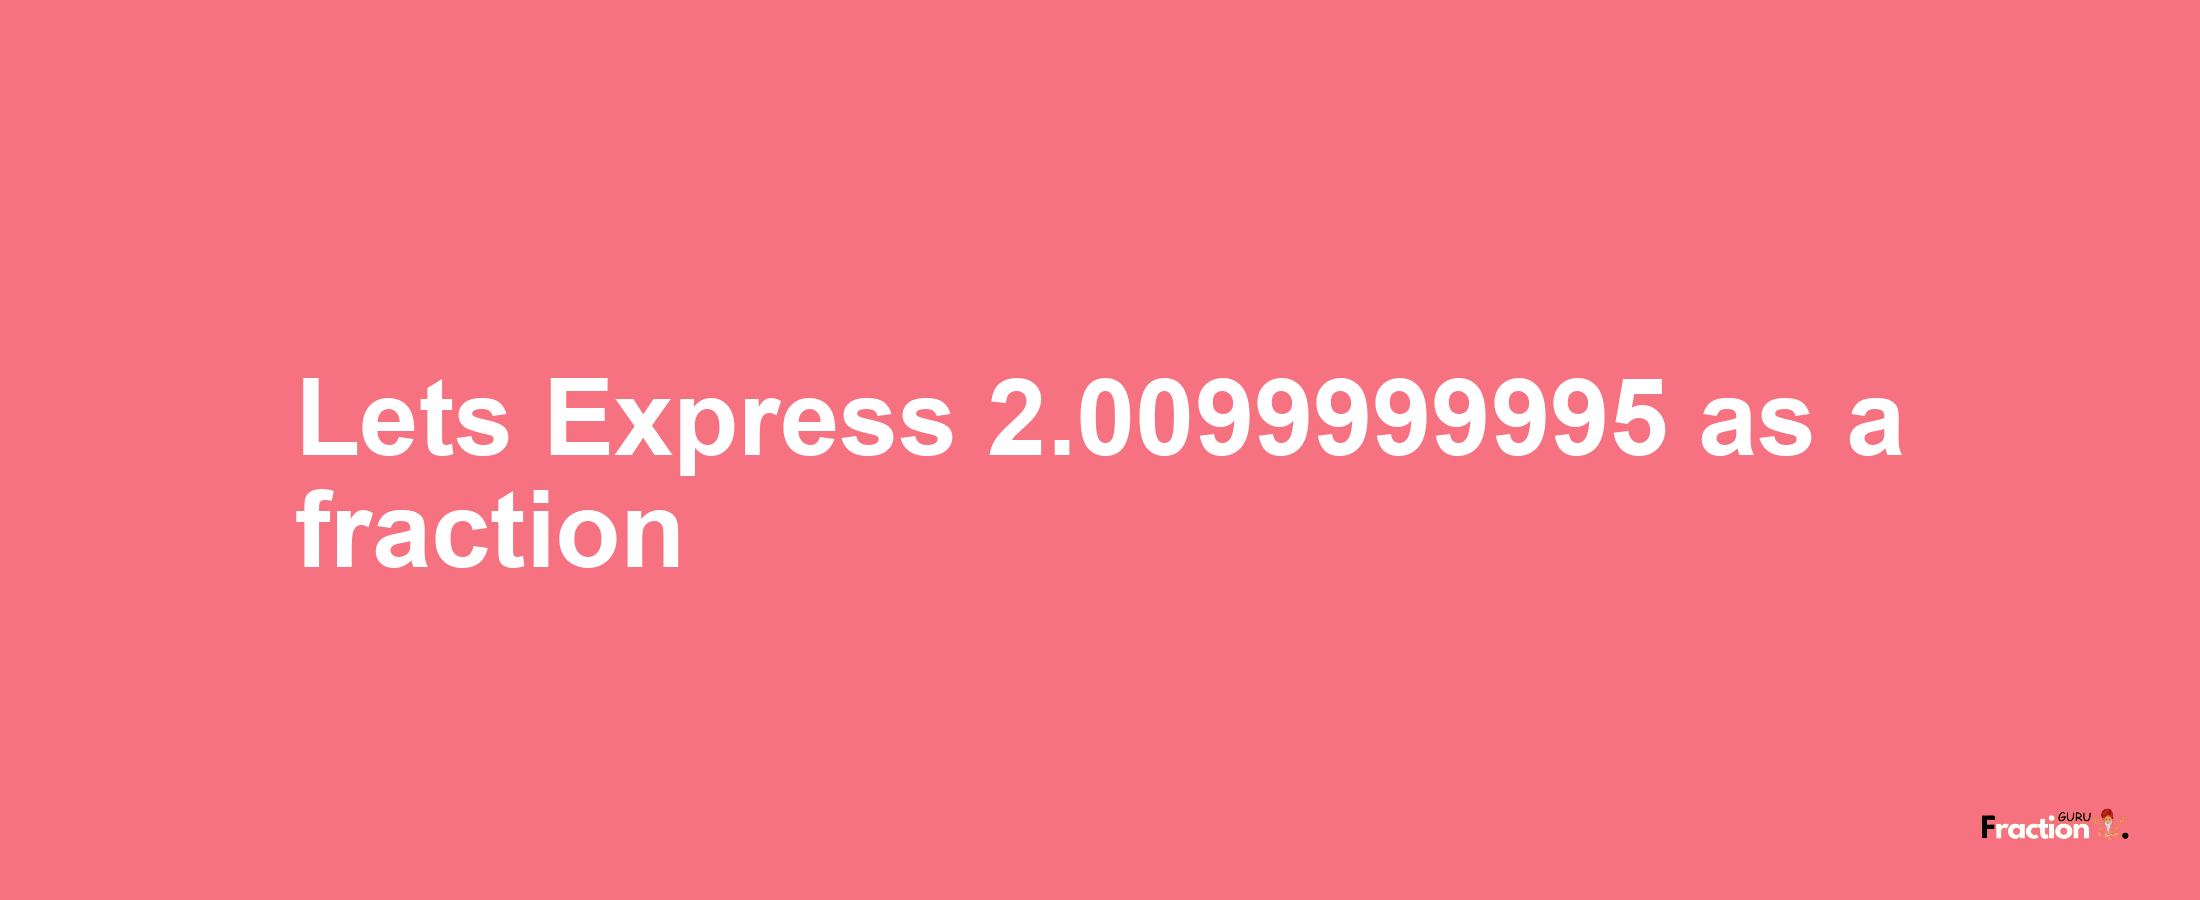 Lets Express 2.0099999995 as afraction